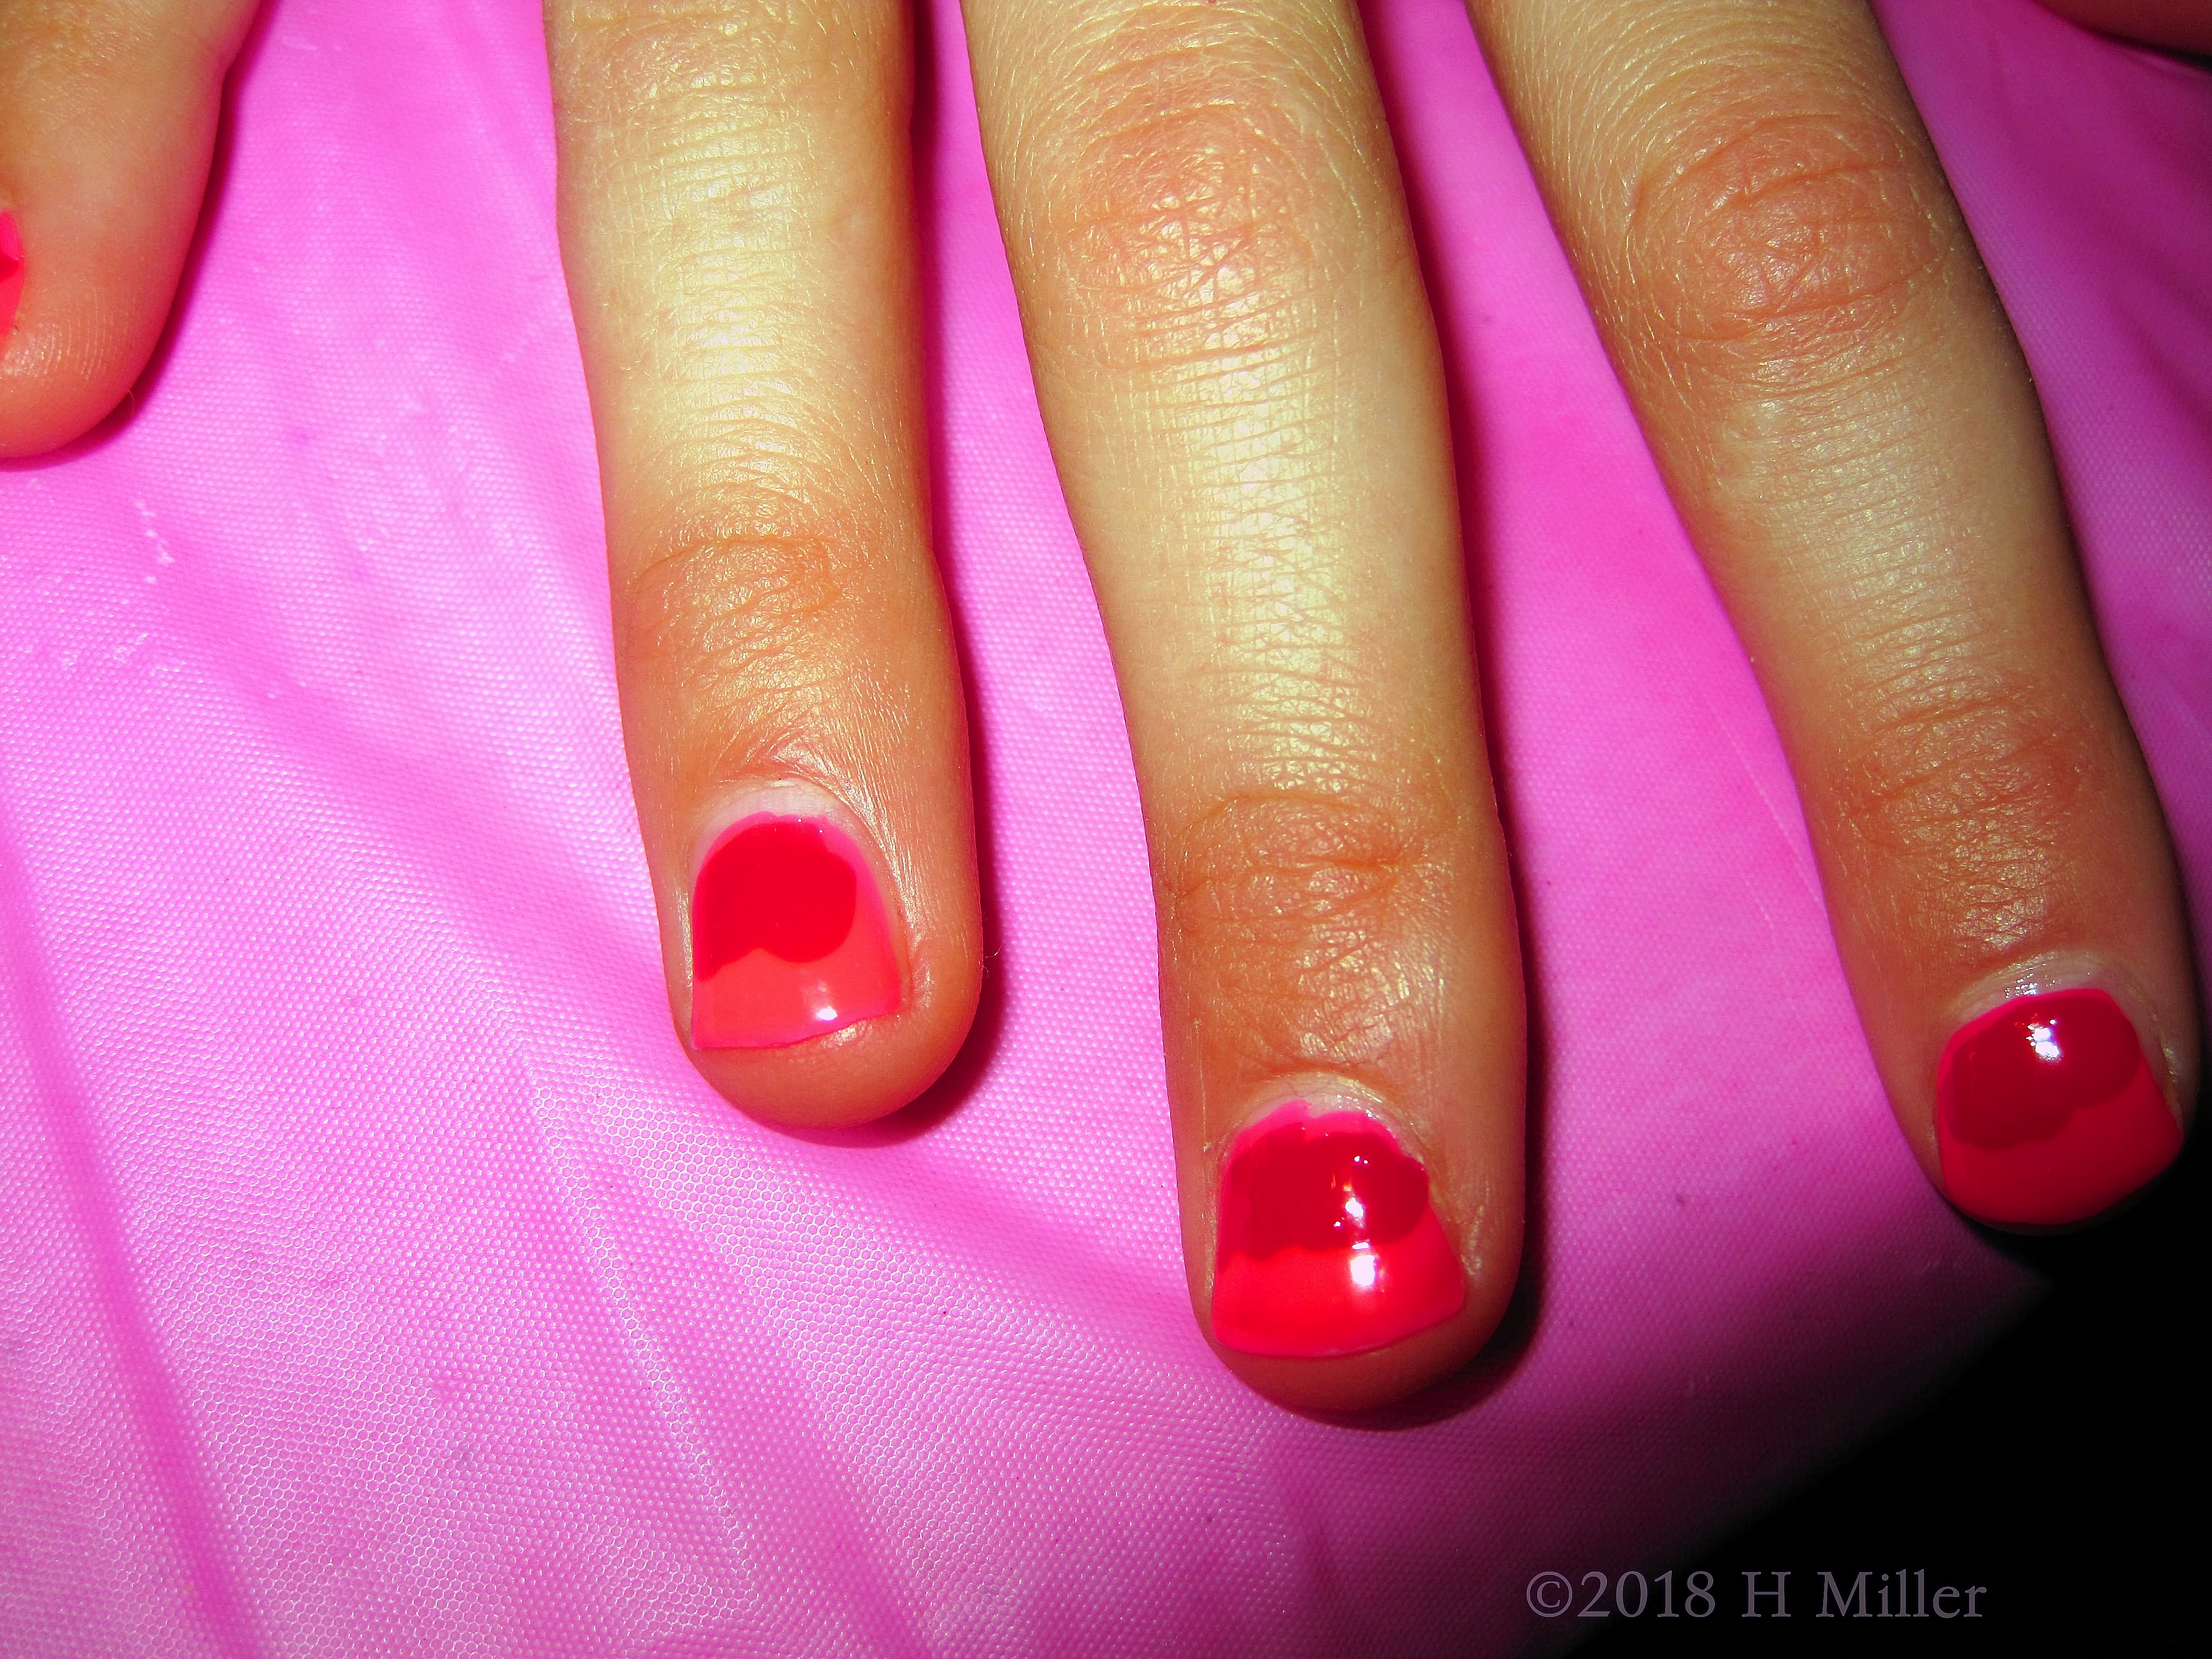 Nail Art Ombre Manicure With Pink And Red Looks Amazing! 